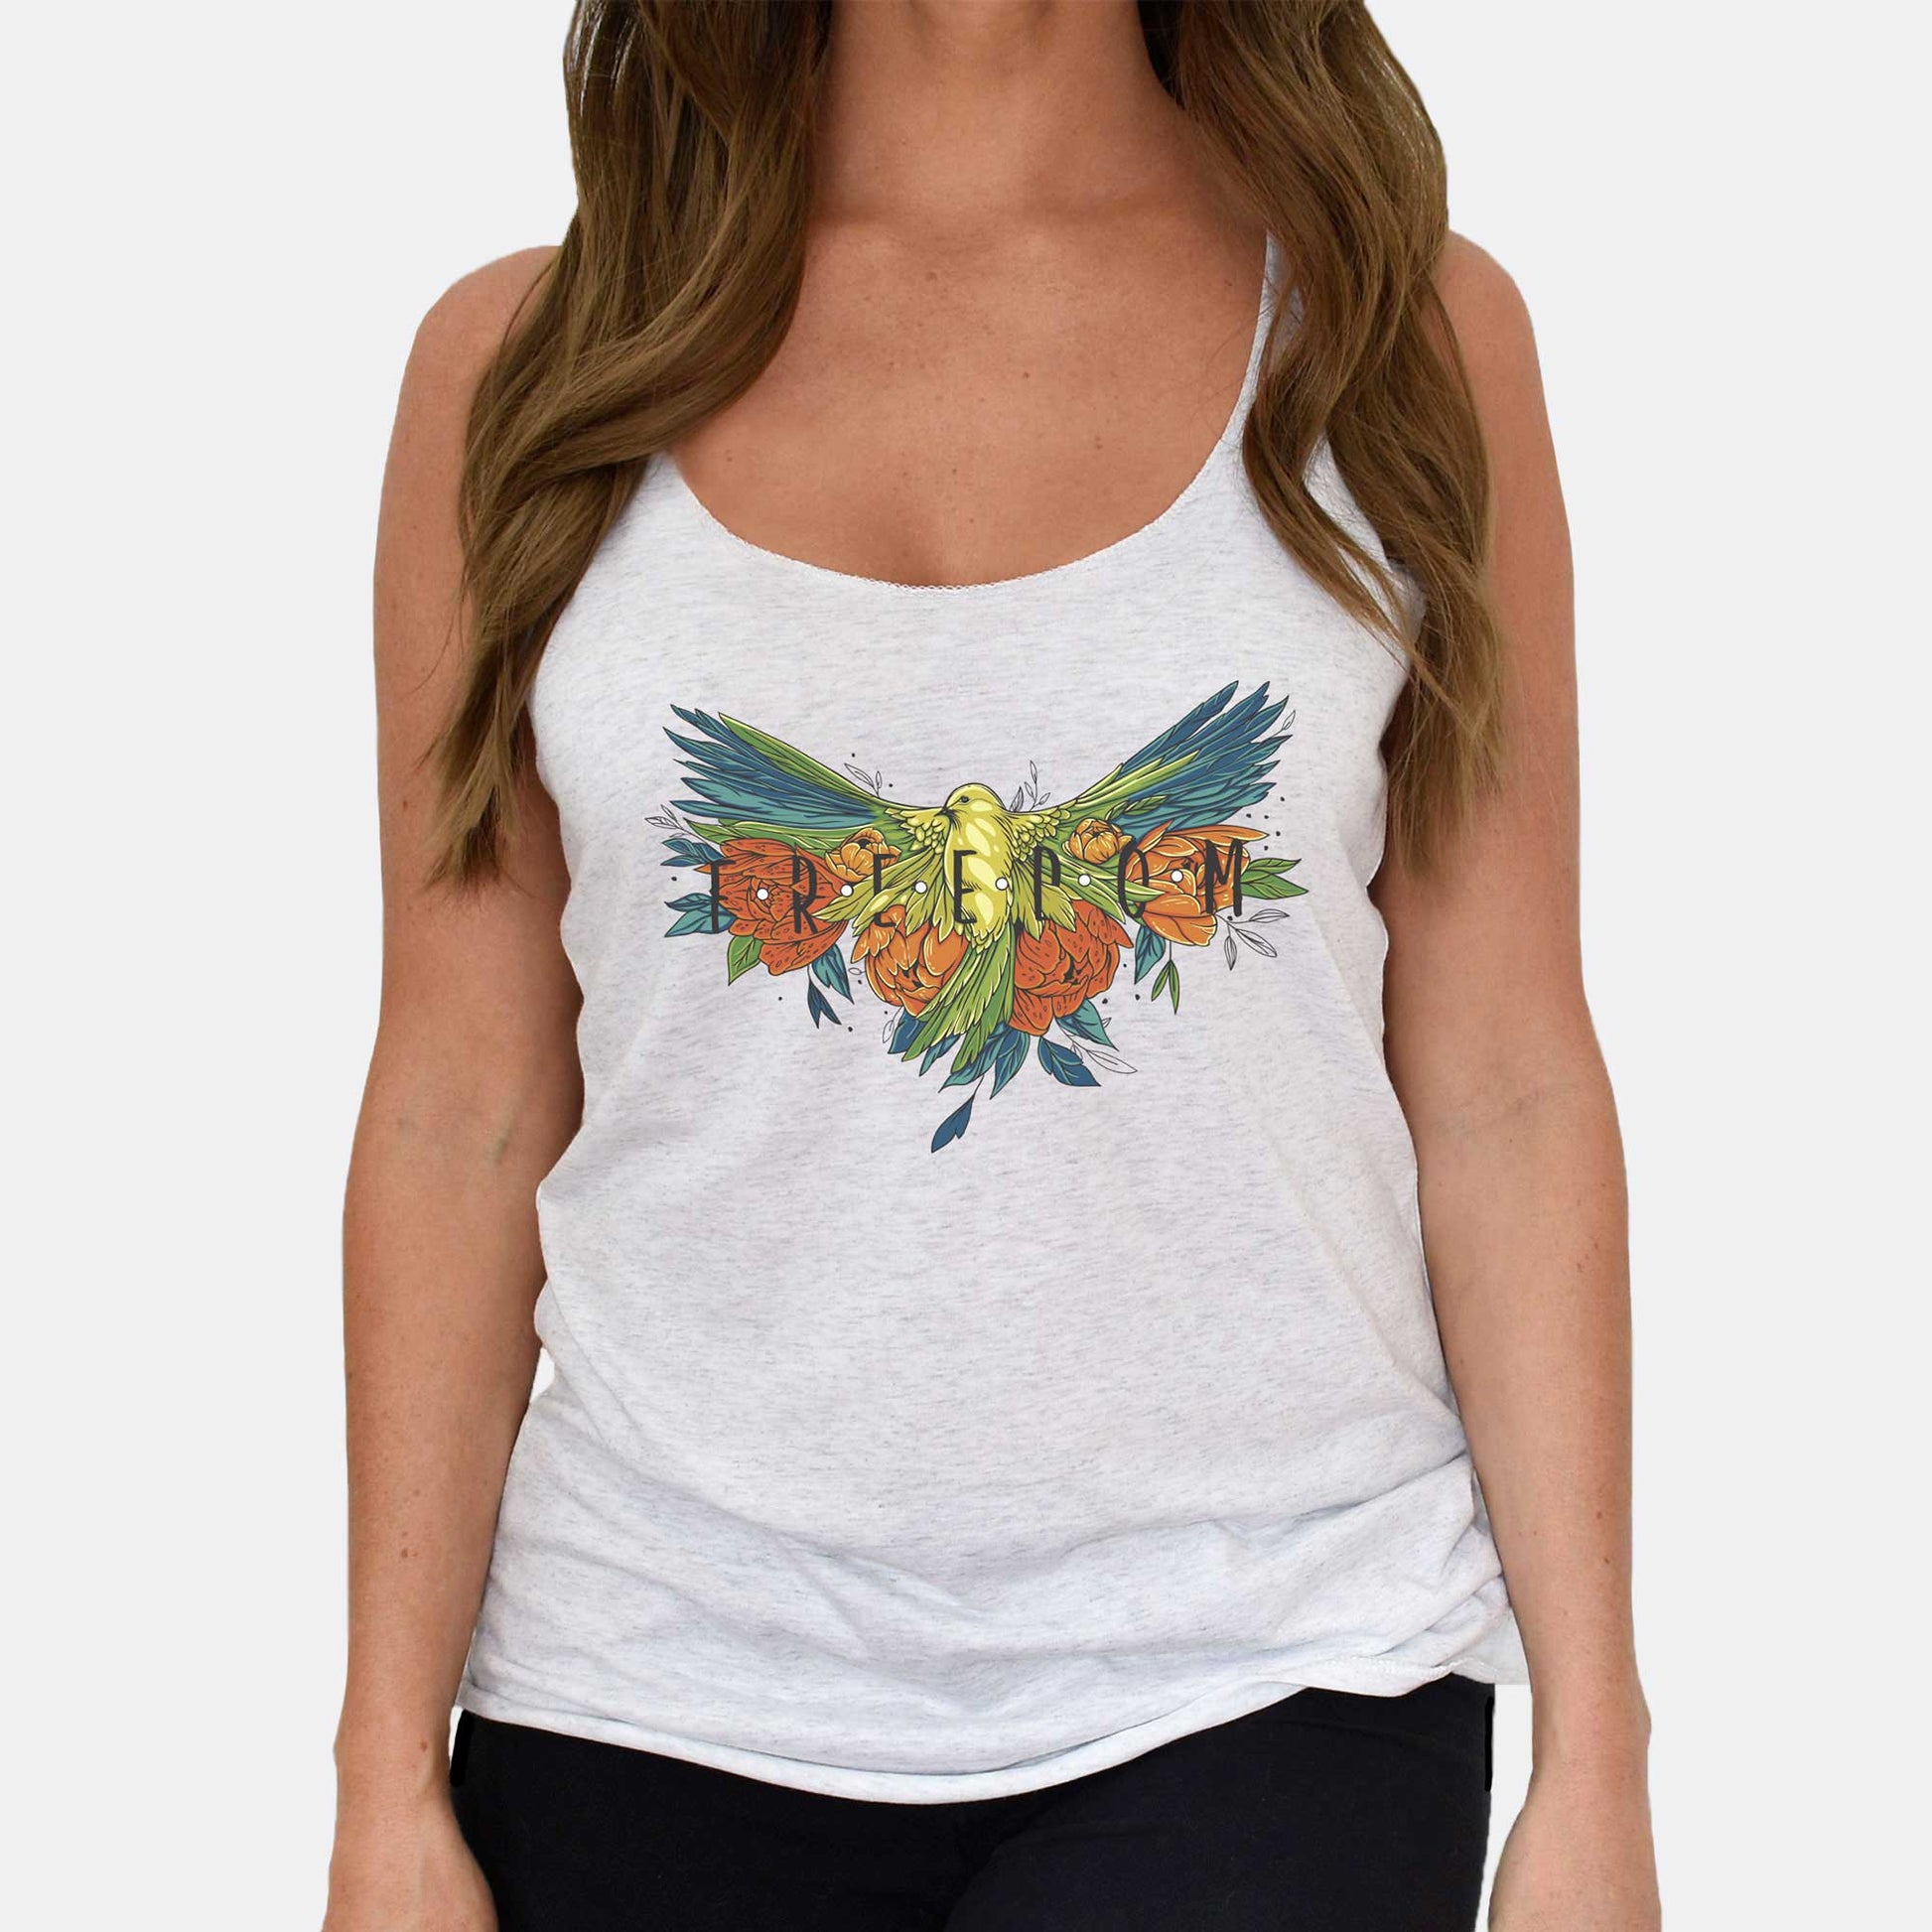 A woman wearing an athletic white Next Level racerback tank top featuring a colorful tattoo style of a bird spreading its wings with the words freedom.